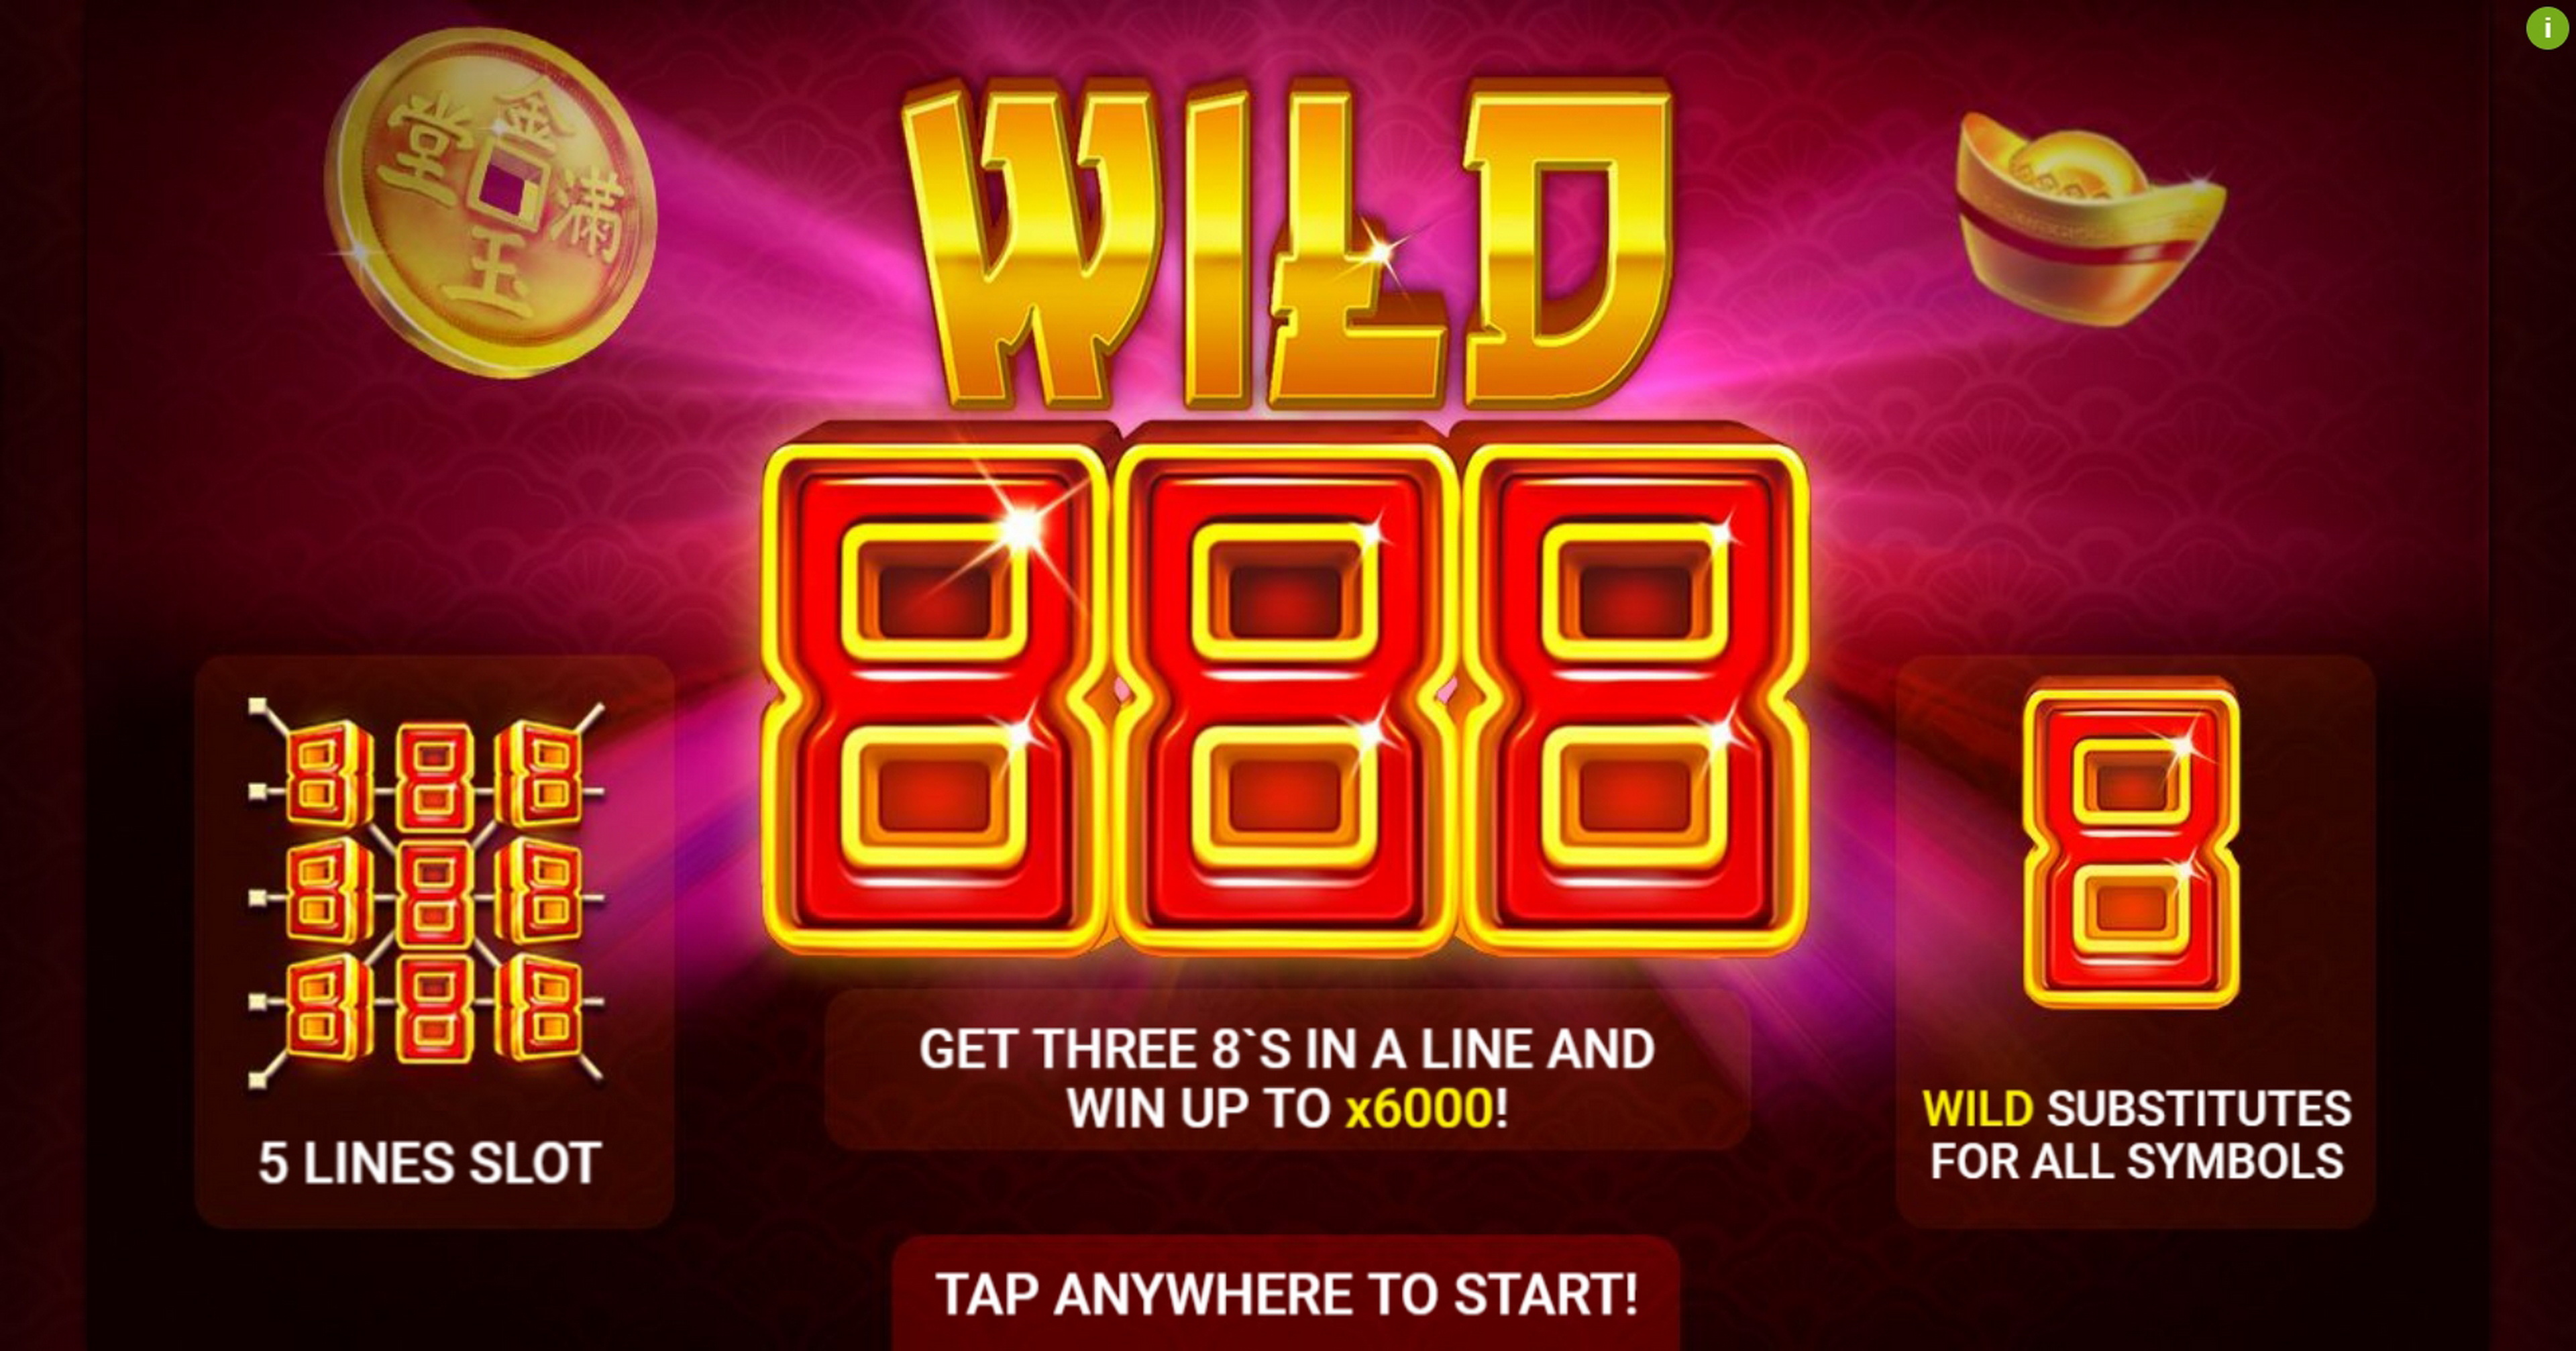 Play Wild 888 Free Casino Slot Game by Booongo Gaming